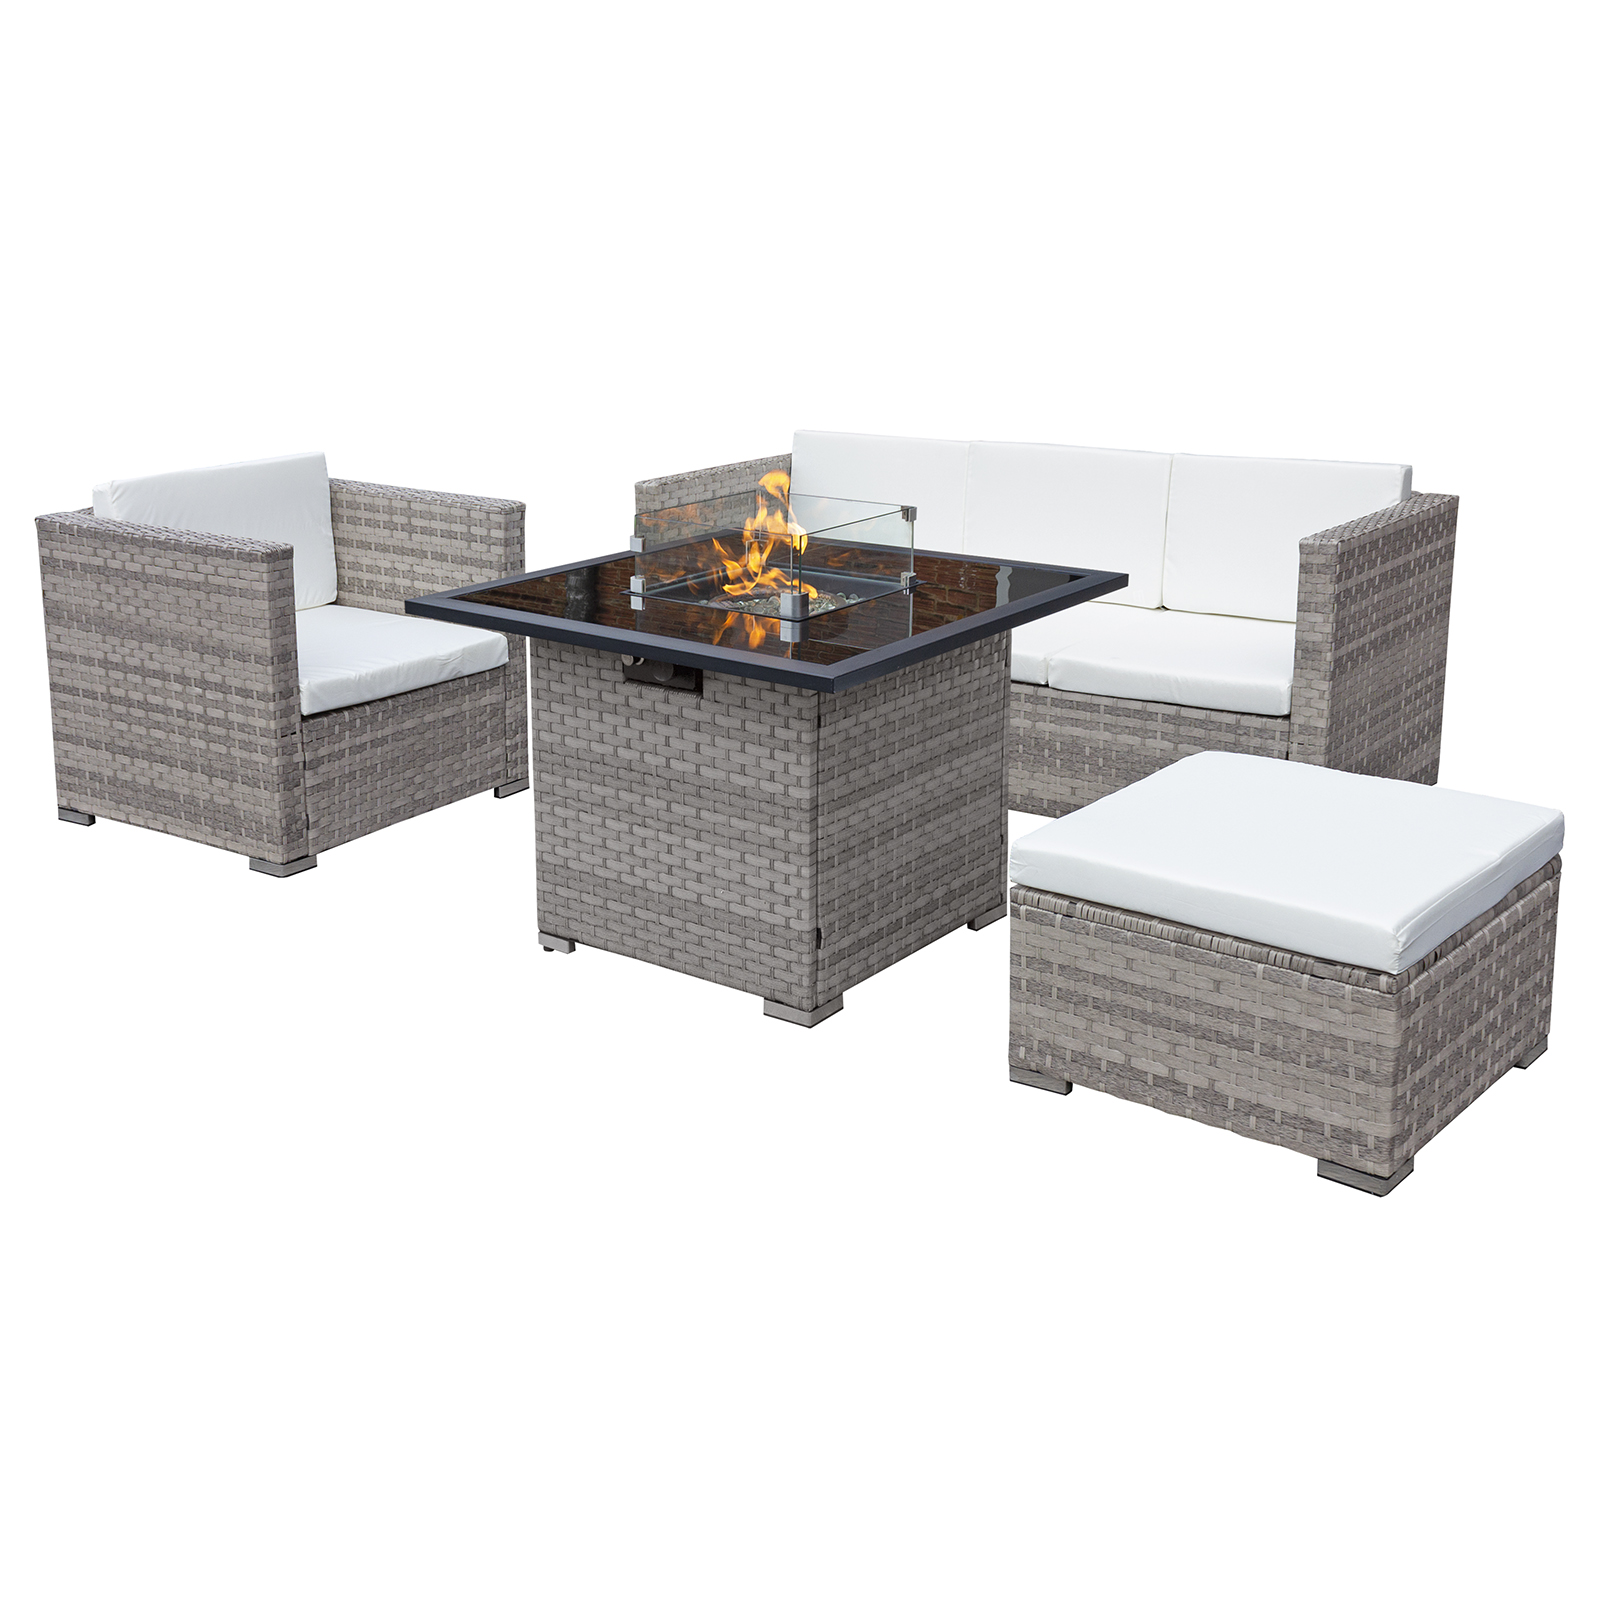 Acorn Rattan 5 Seat Firepit Lounge Set in Dove Grey with White Cushions